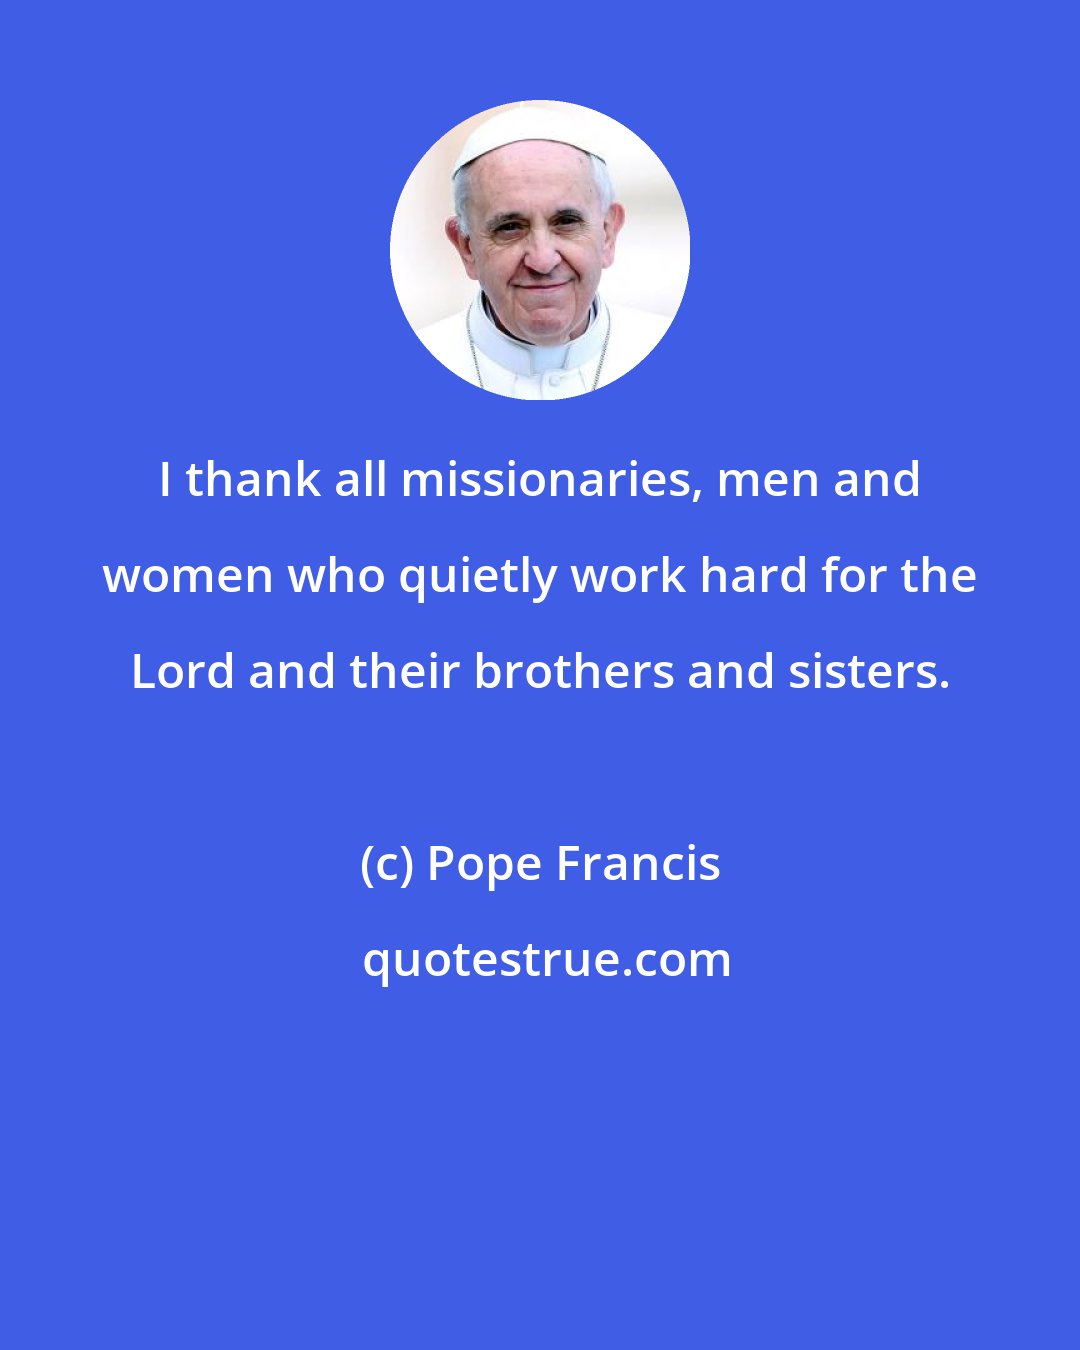 Pope Francis: I thank all missionaries, men and women who quietly work hard for the Lord and their brothers and sisters.